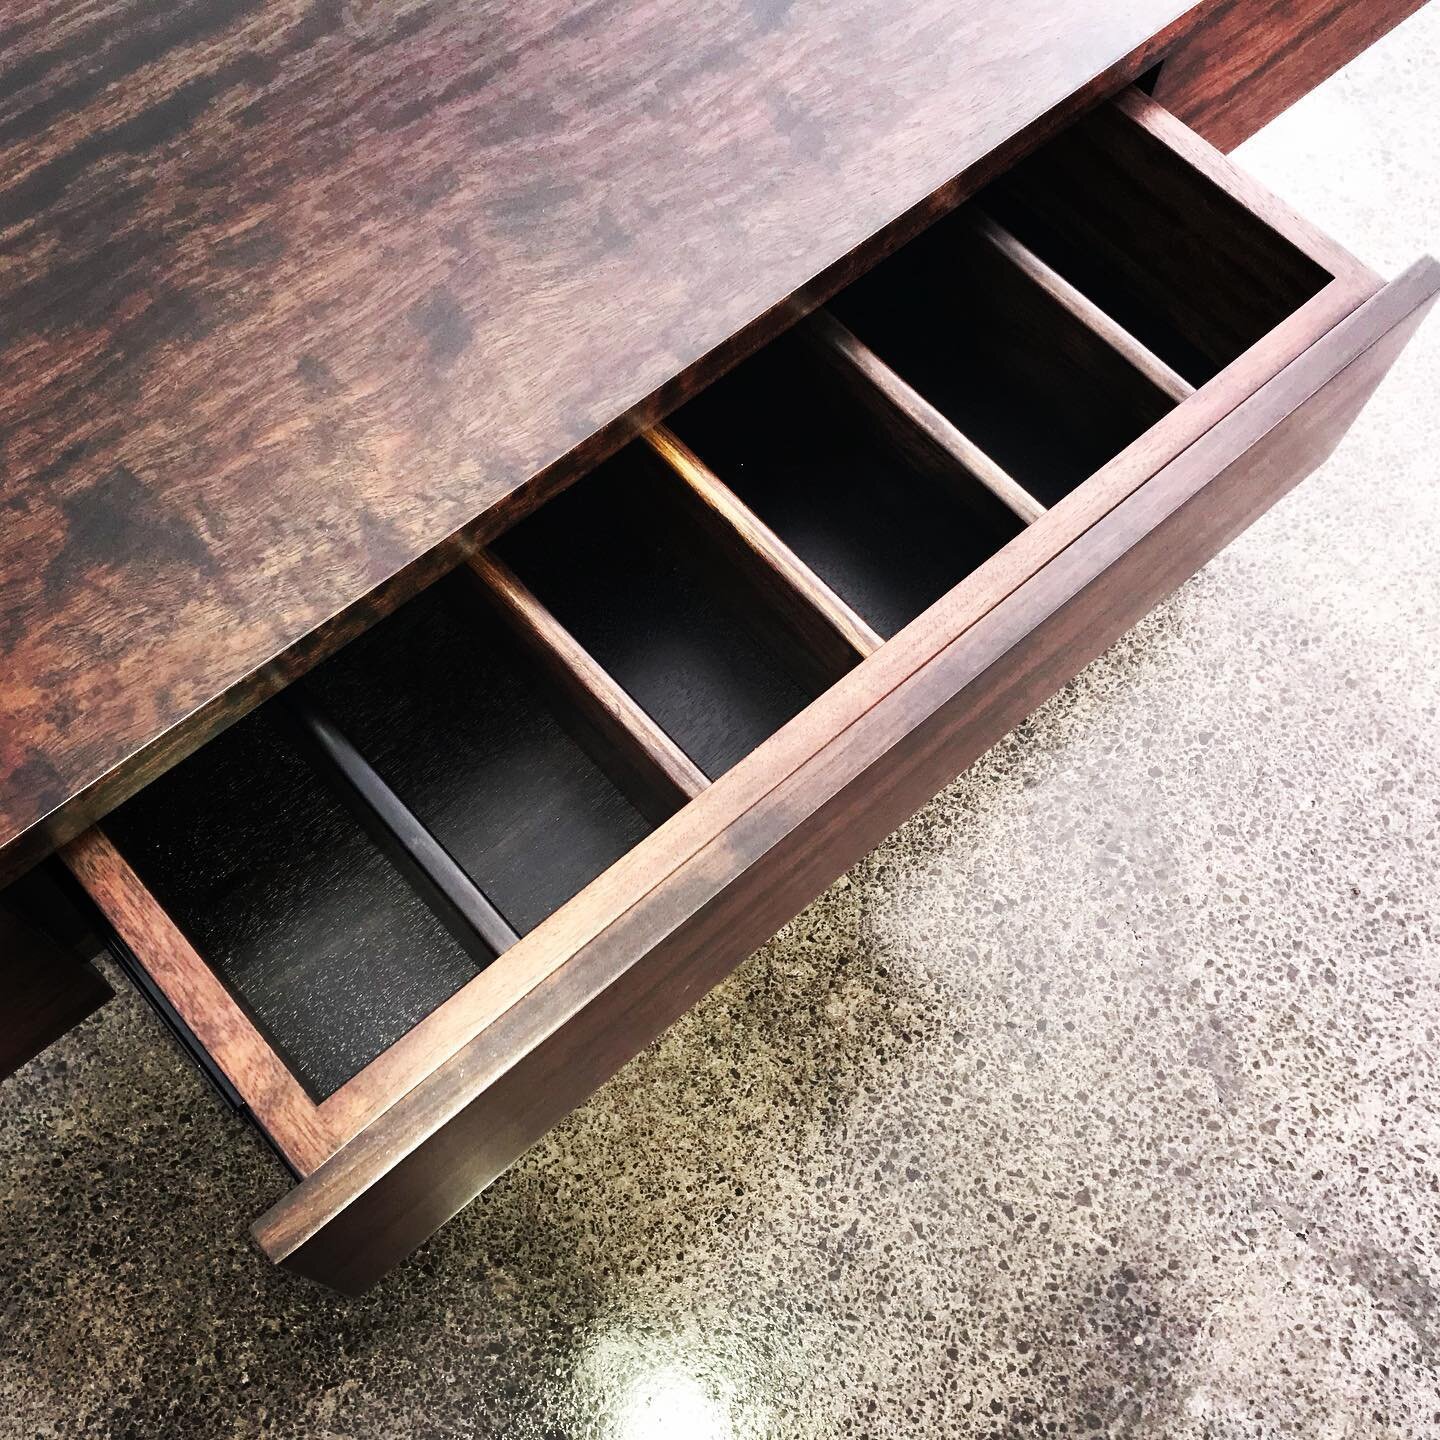 The mix of mediums adds to this very simple yet functional African Rosewood sideboard.

Our client was wanting a contemporary designed sideboard that matches their dining table. It also needed to store their cutlery, placemats and other dining access